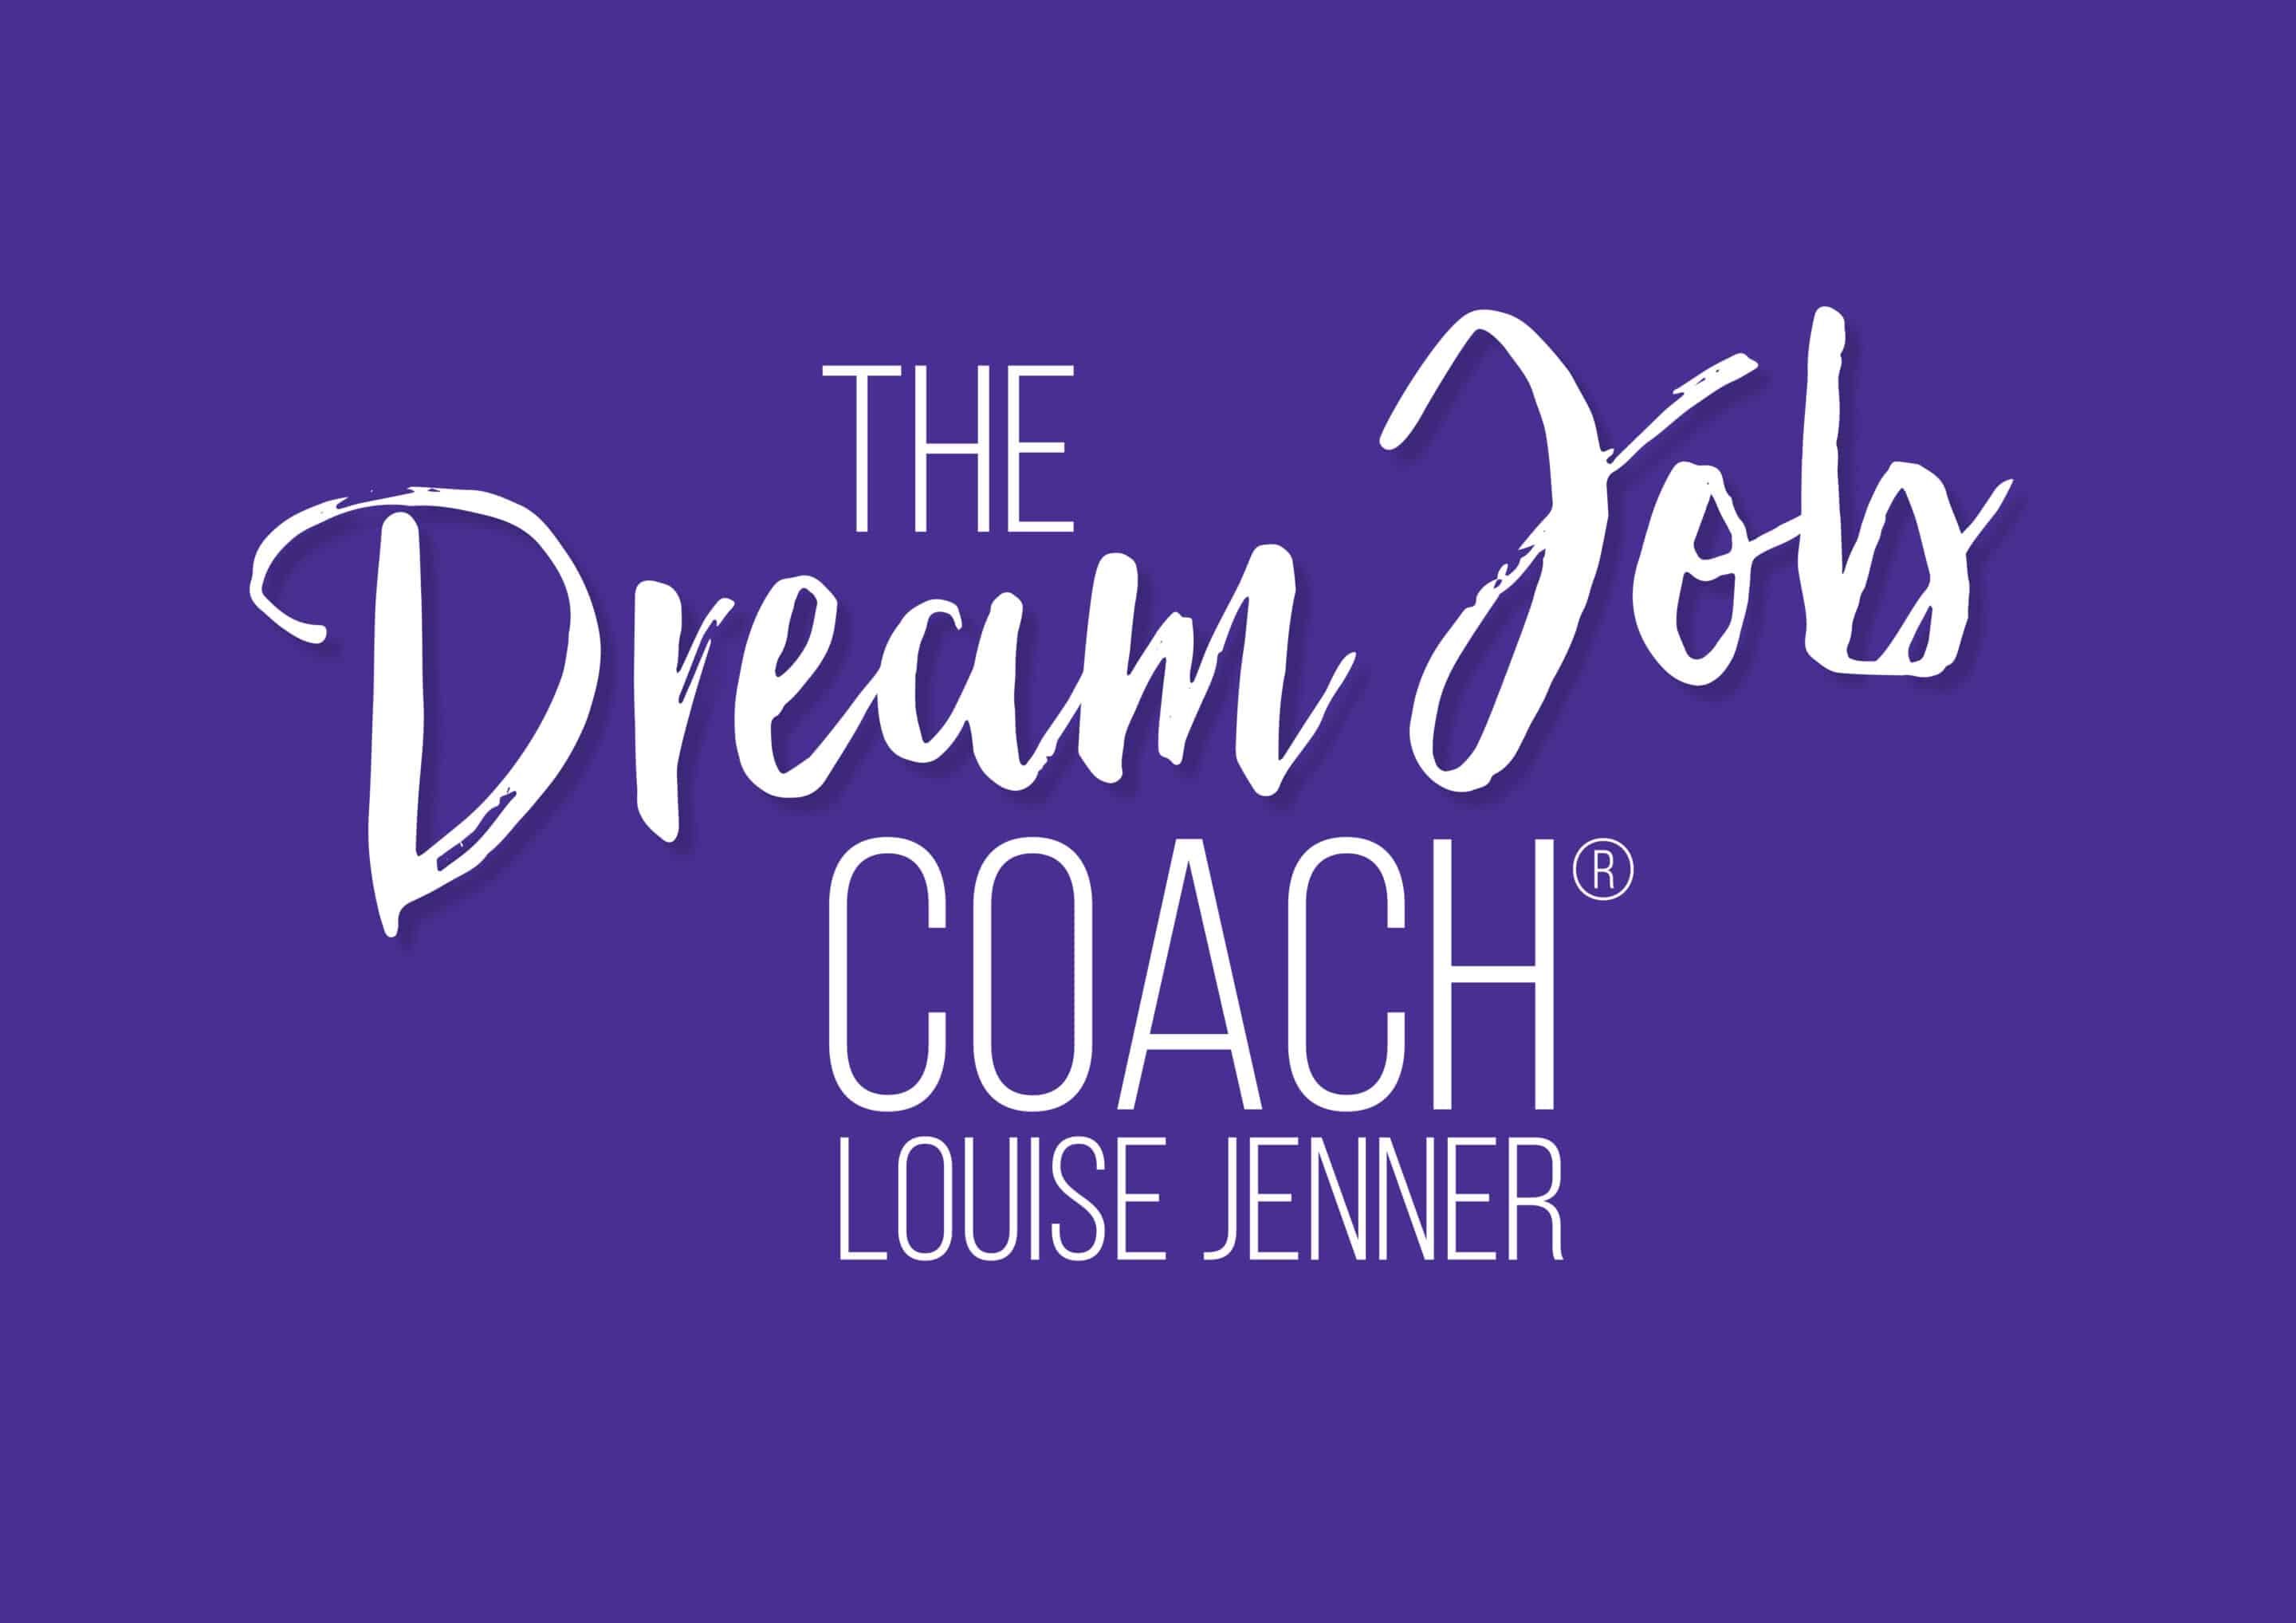 Logo: The Dream Job Coach LOUISE JENNER</p>
<p>White text on purple background.